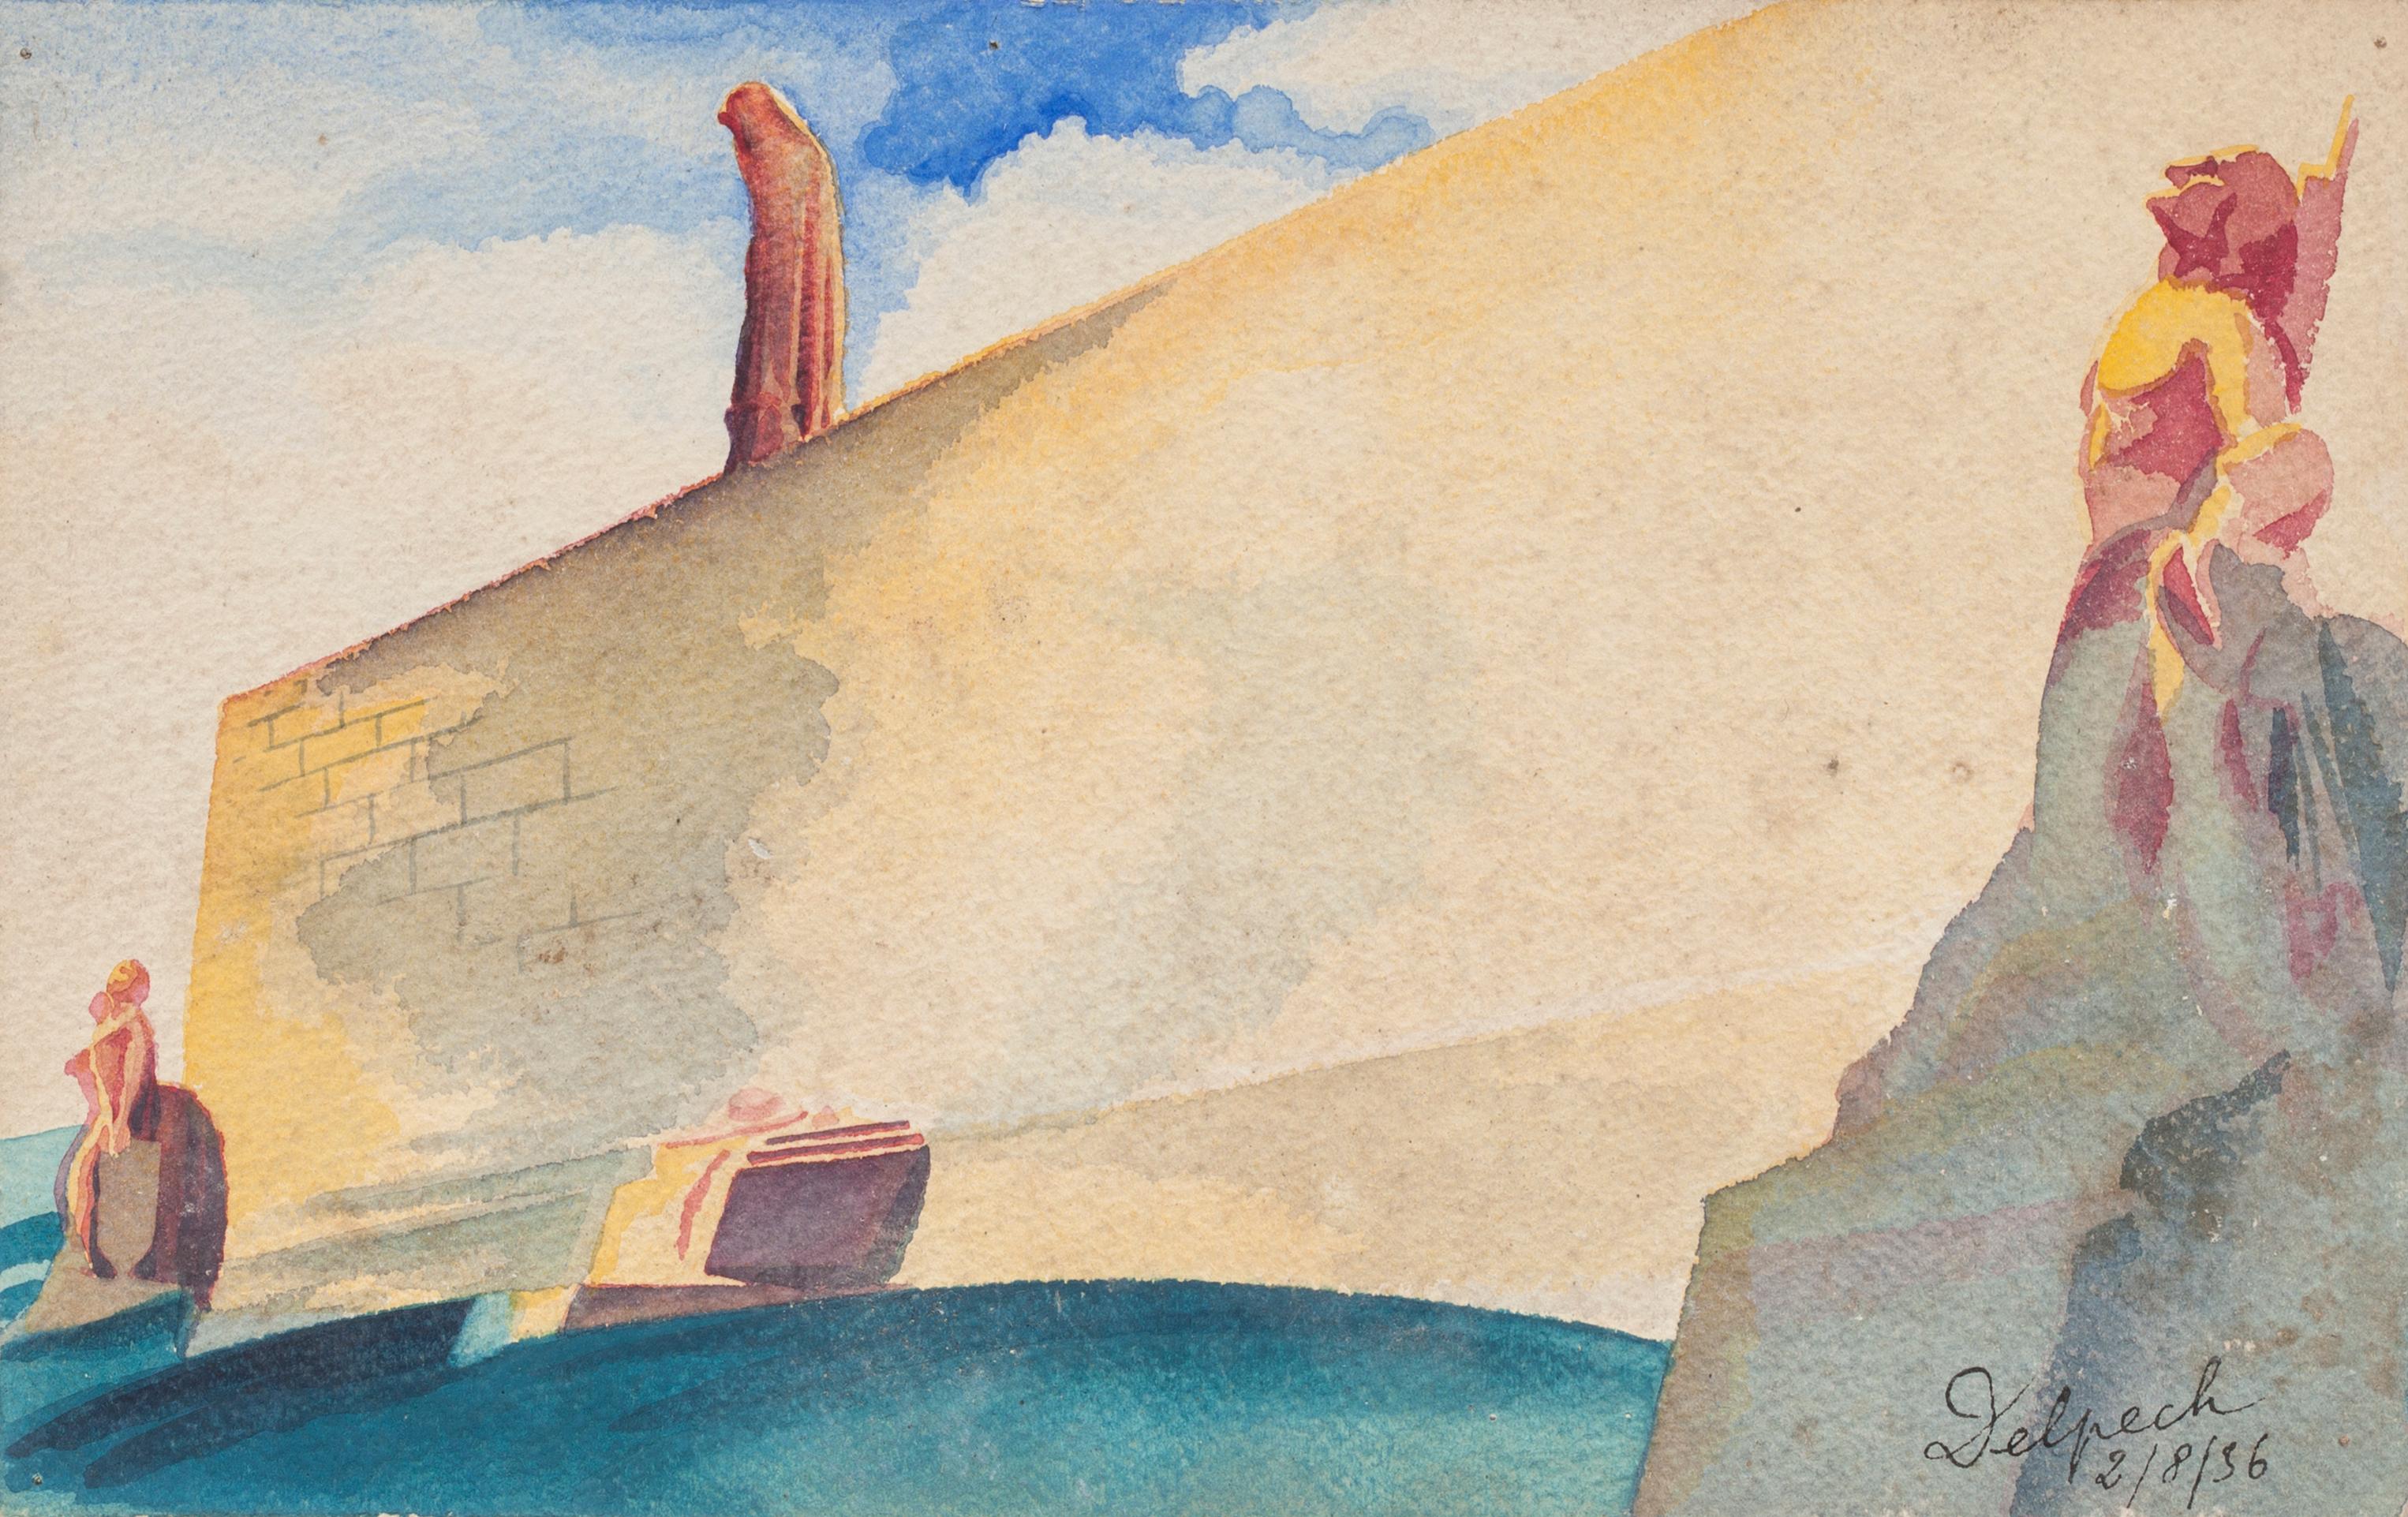 "Composition" is a drawing in watercolor on paper, realized by Jean Delpech (1916-1988). 
The state of preservation of the artwork is very good.

Sheet dimension: 14.7 x 23.3 cm.

The artwork represents beautiful landscape with vivid color, joyfully